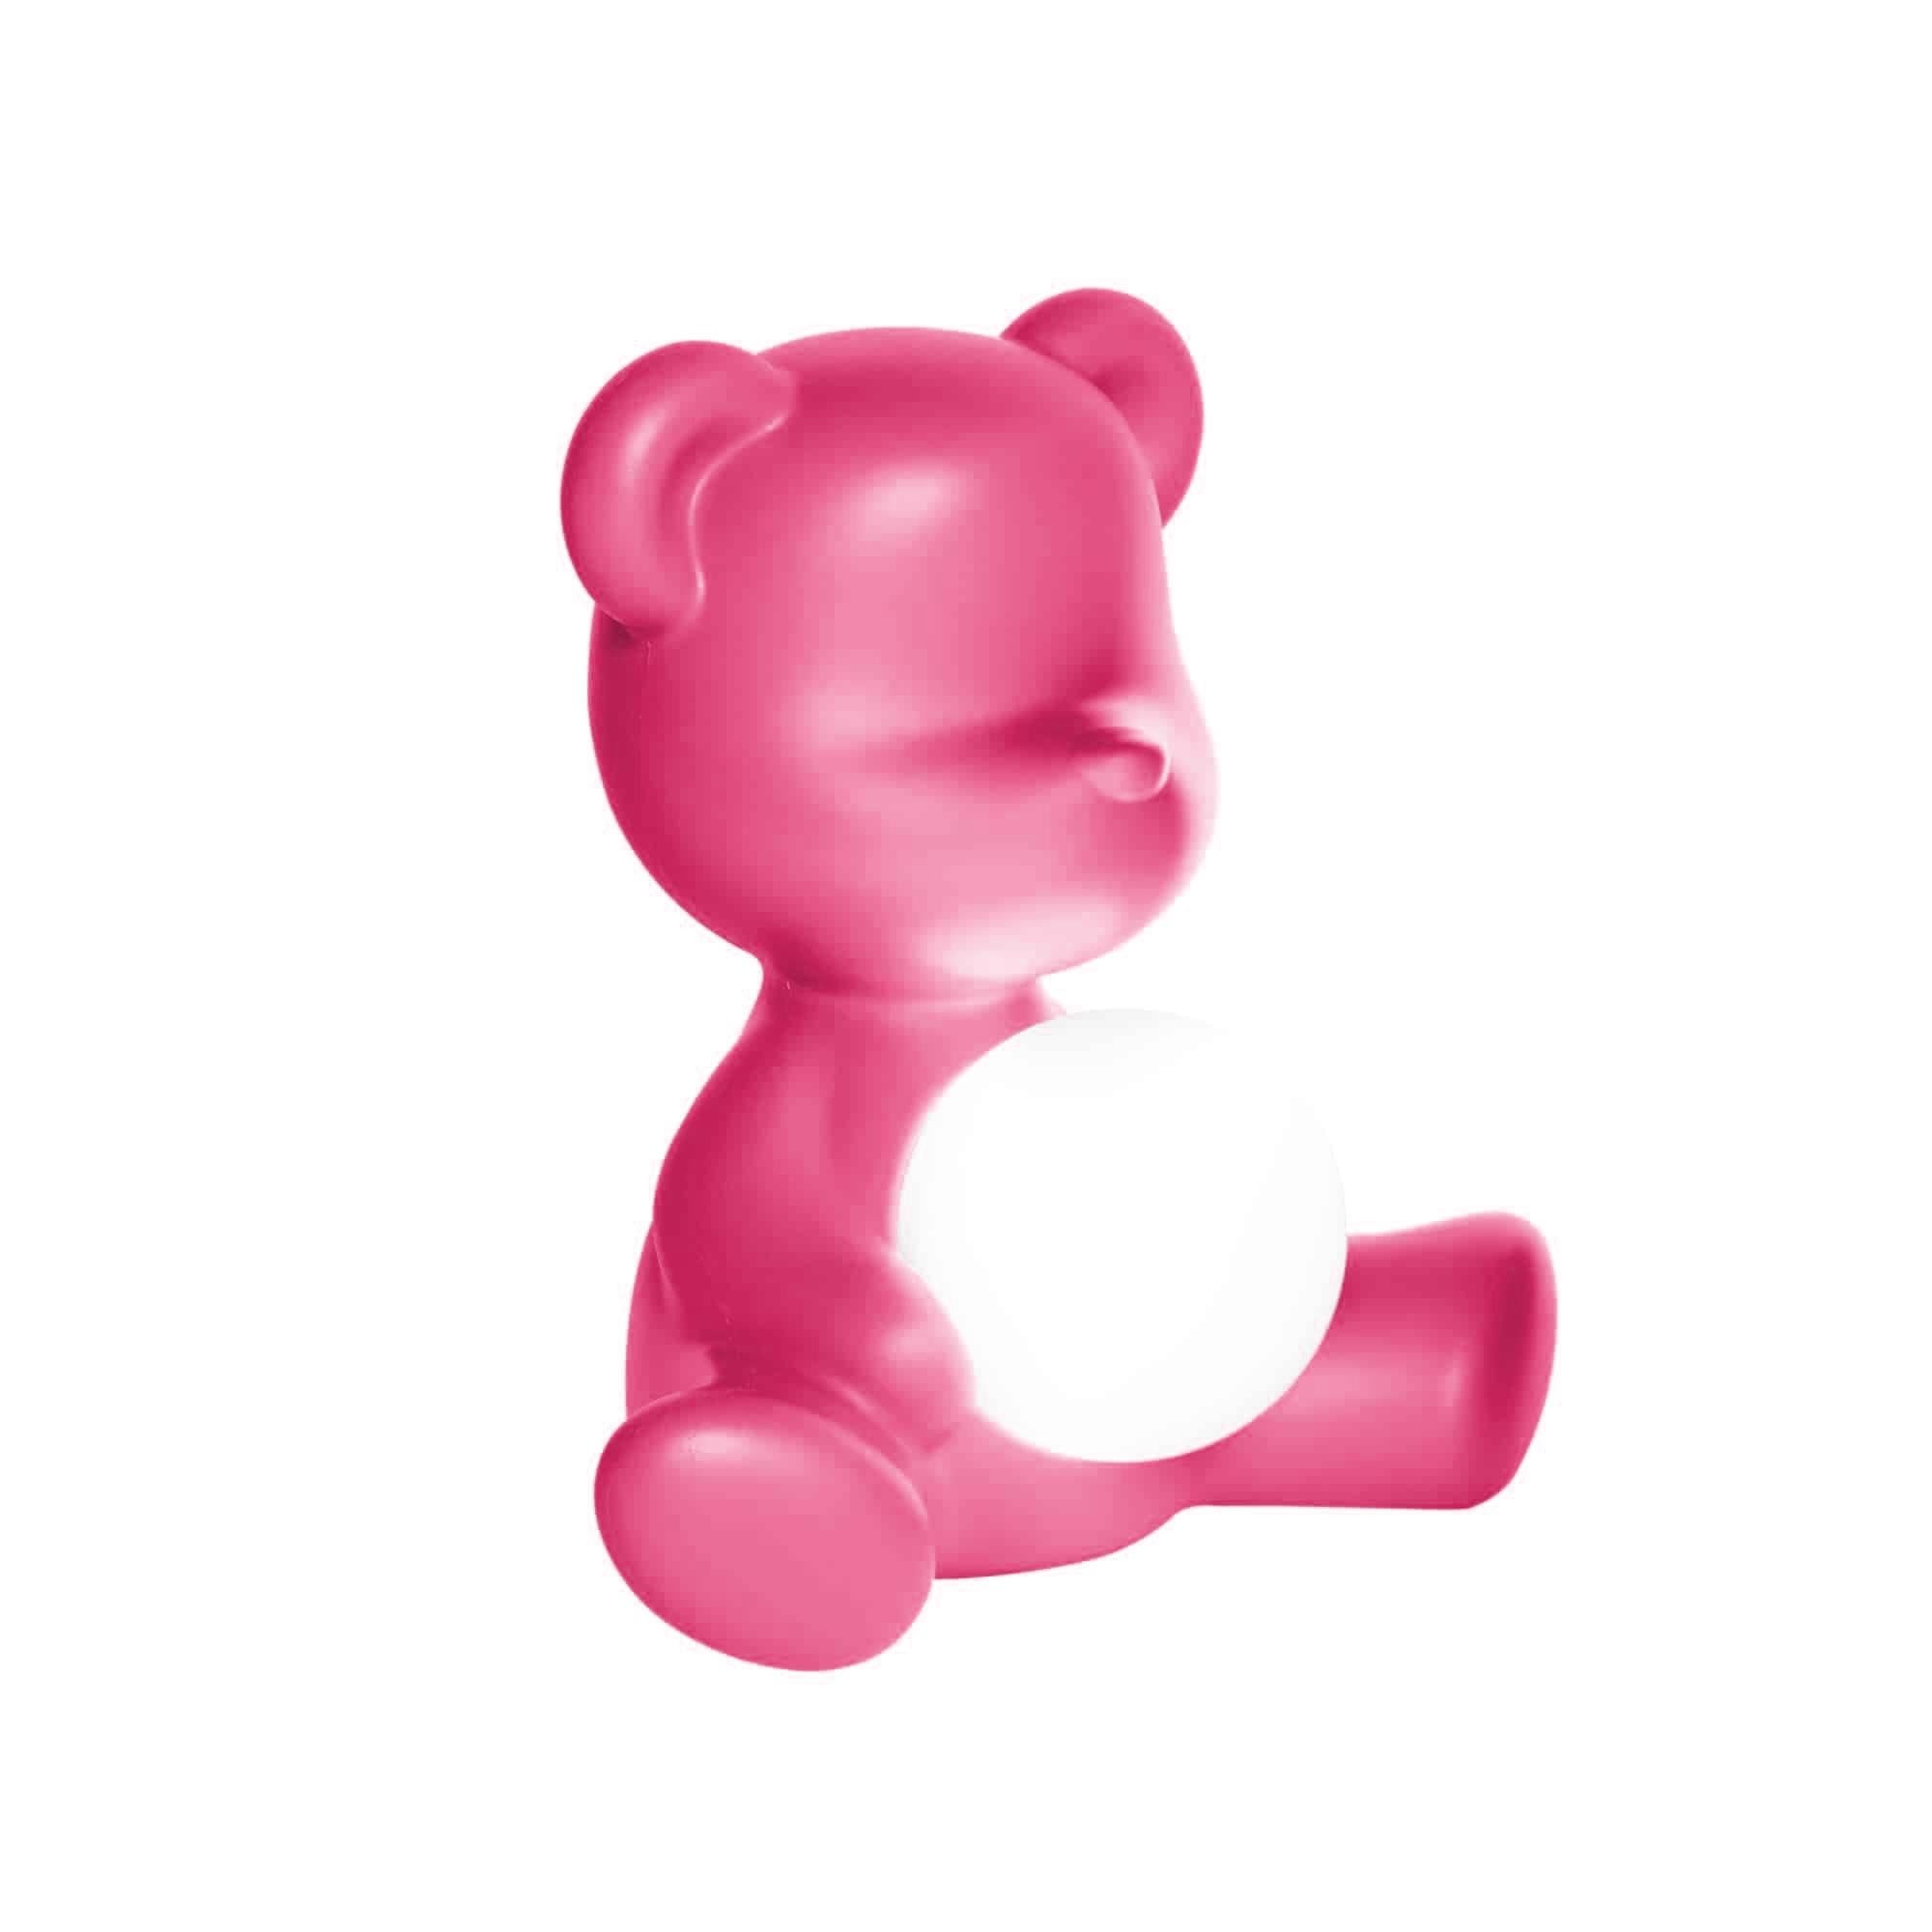 Type COLLECTIONI in the search bar to view 300 unique products like this one.

The teddy bear, the emotional object par excellence, is reinterpreted by Stefano Giovannoni and becomes a table lamp. This new pop icon is tender, and fun at the same